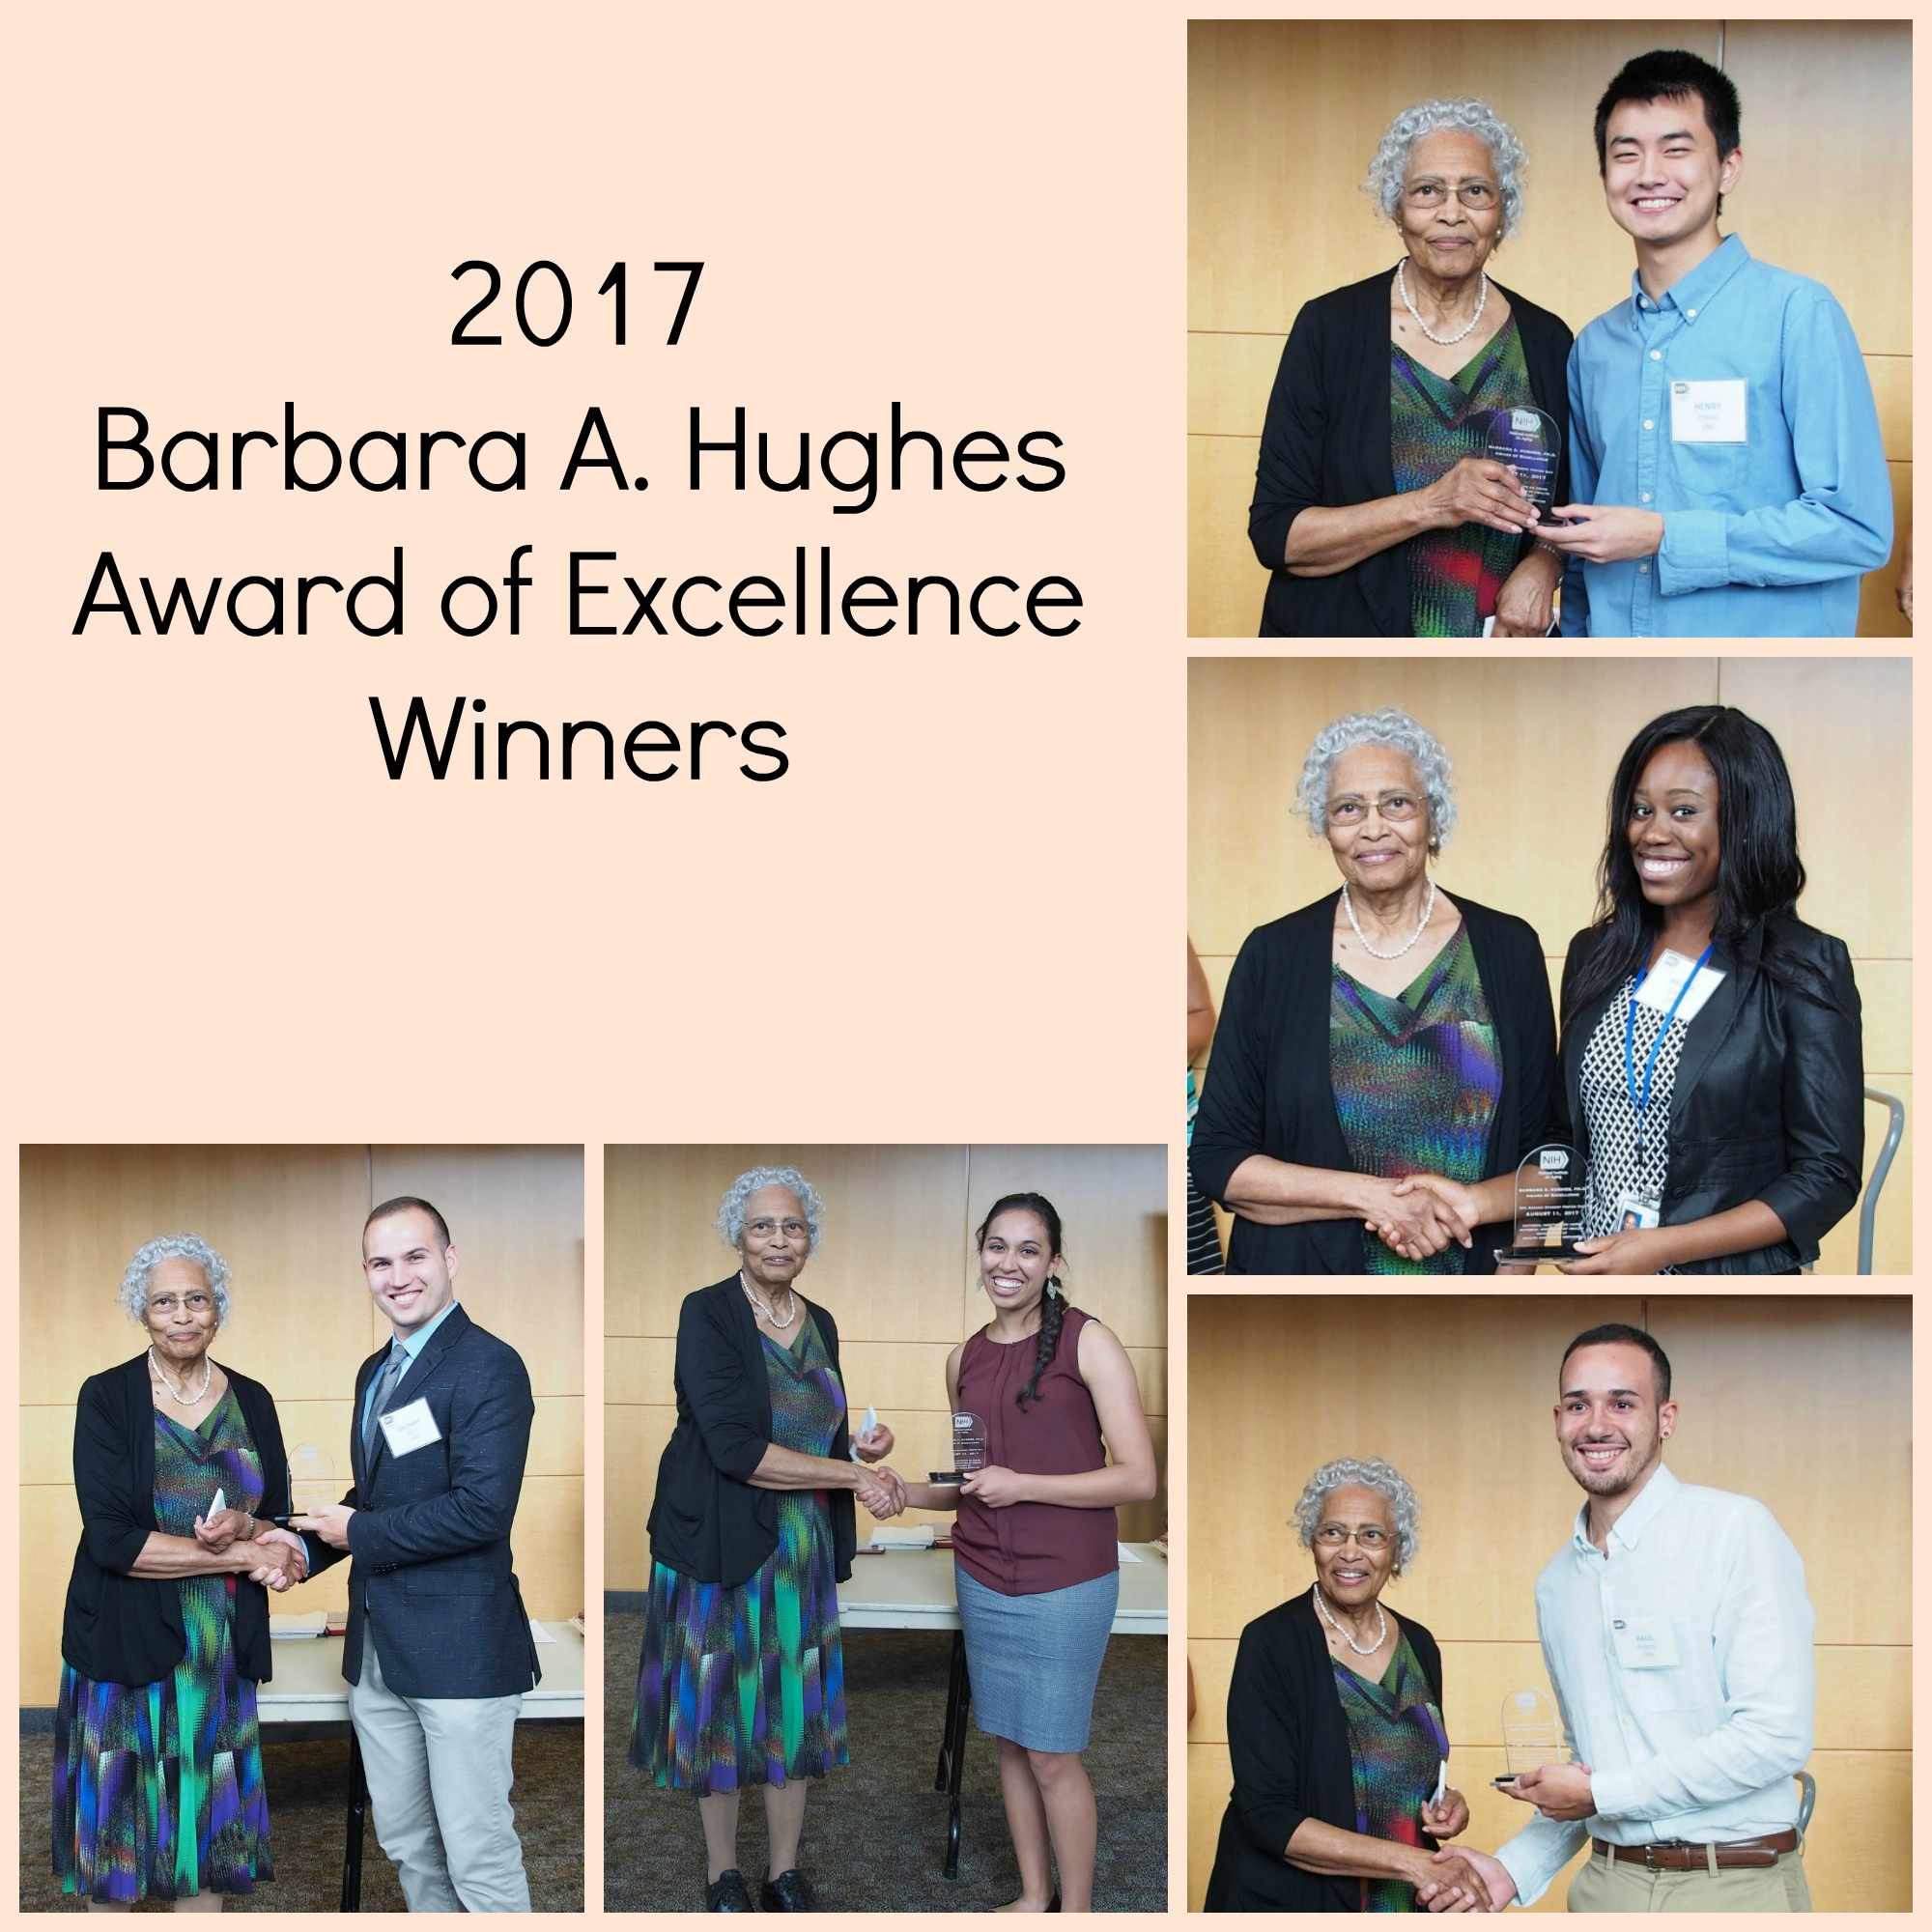 Dr. Hughes poses with this year's Barbara A. Hughes Award of Excellence winners: Ifeoma J. Azinge, Zachary Cook, Raul Y. Ramos Sanchez, Tara N. Srinivas, and Henry Zhang